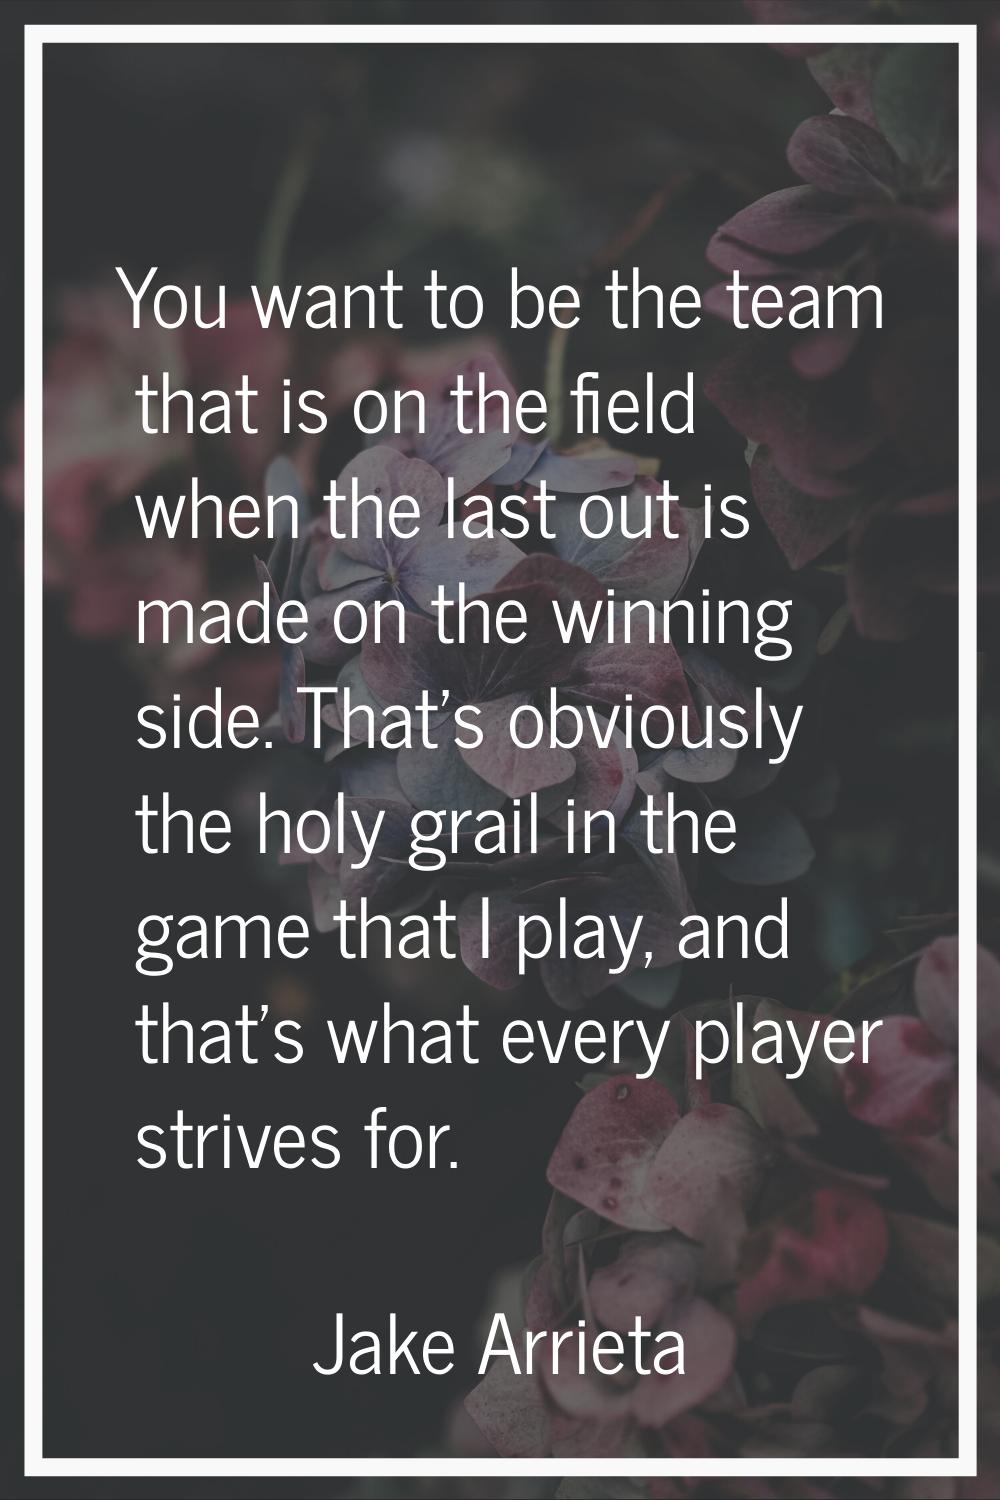 You want to be the team that is on the field when the last out is made on the winning side. That's 